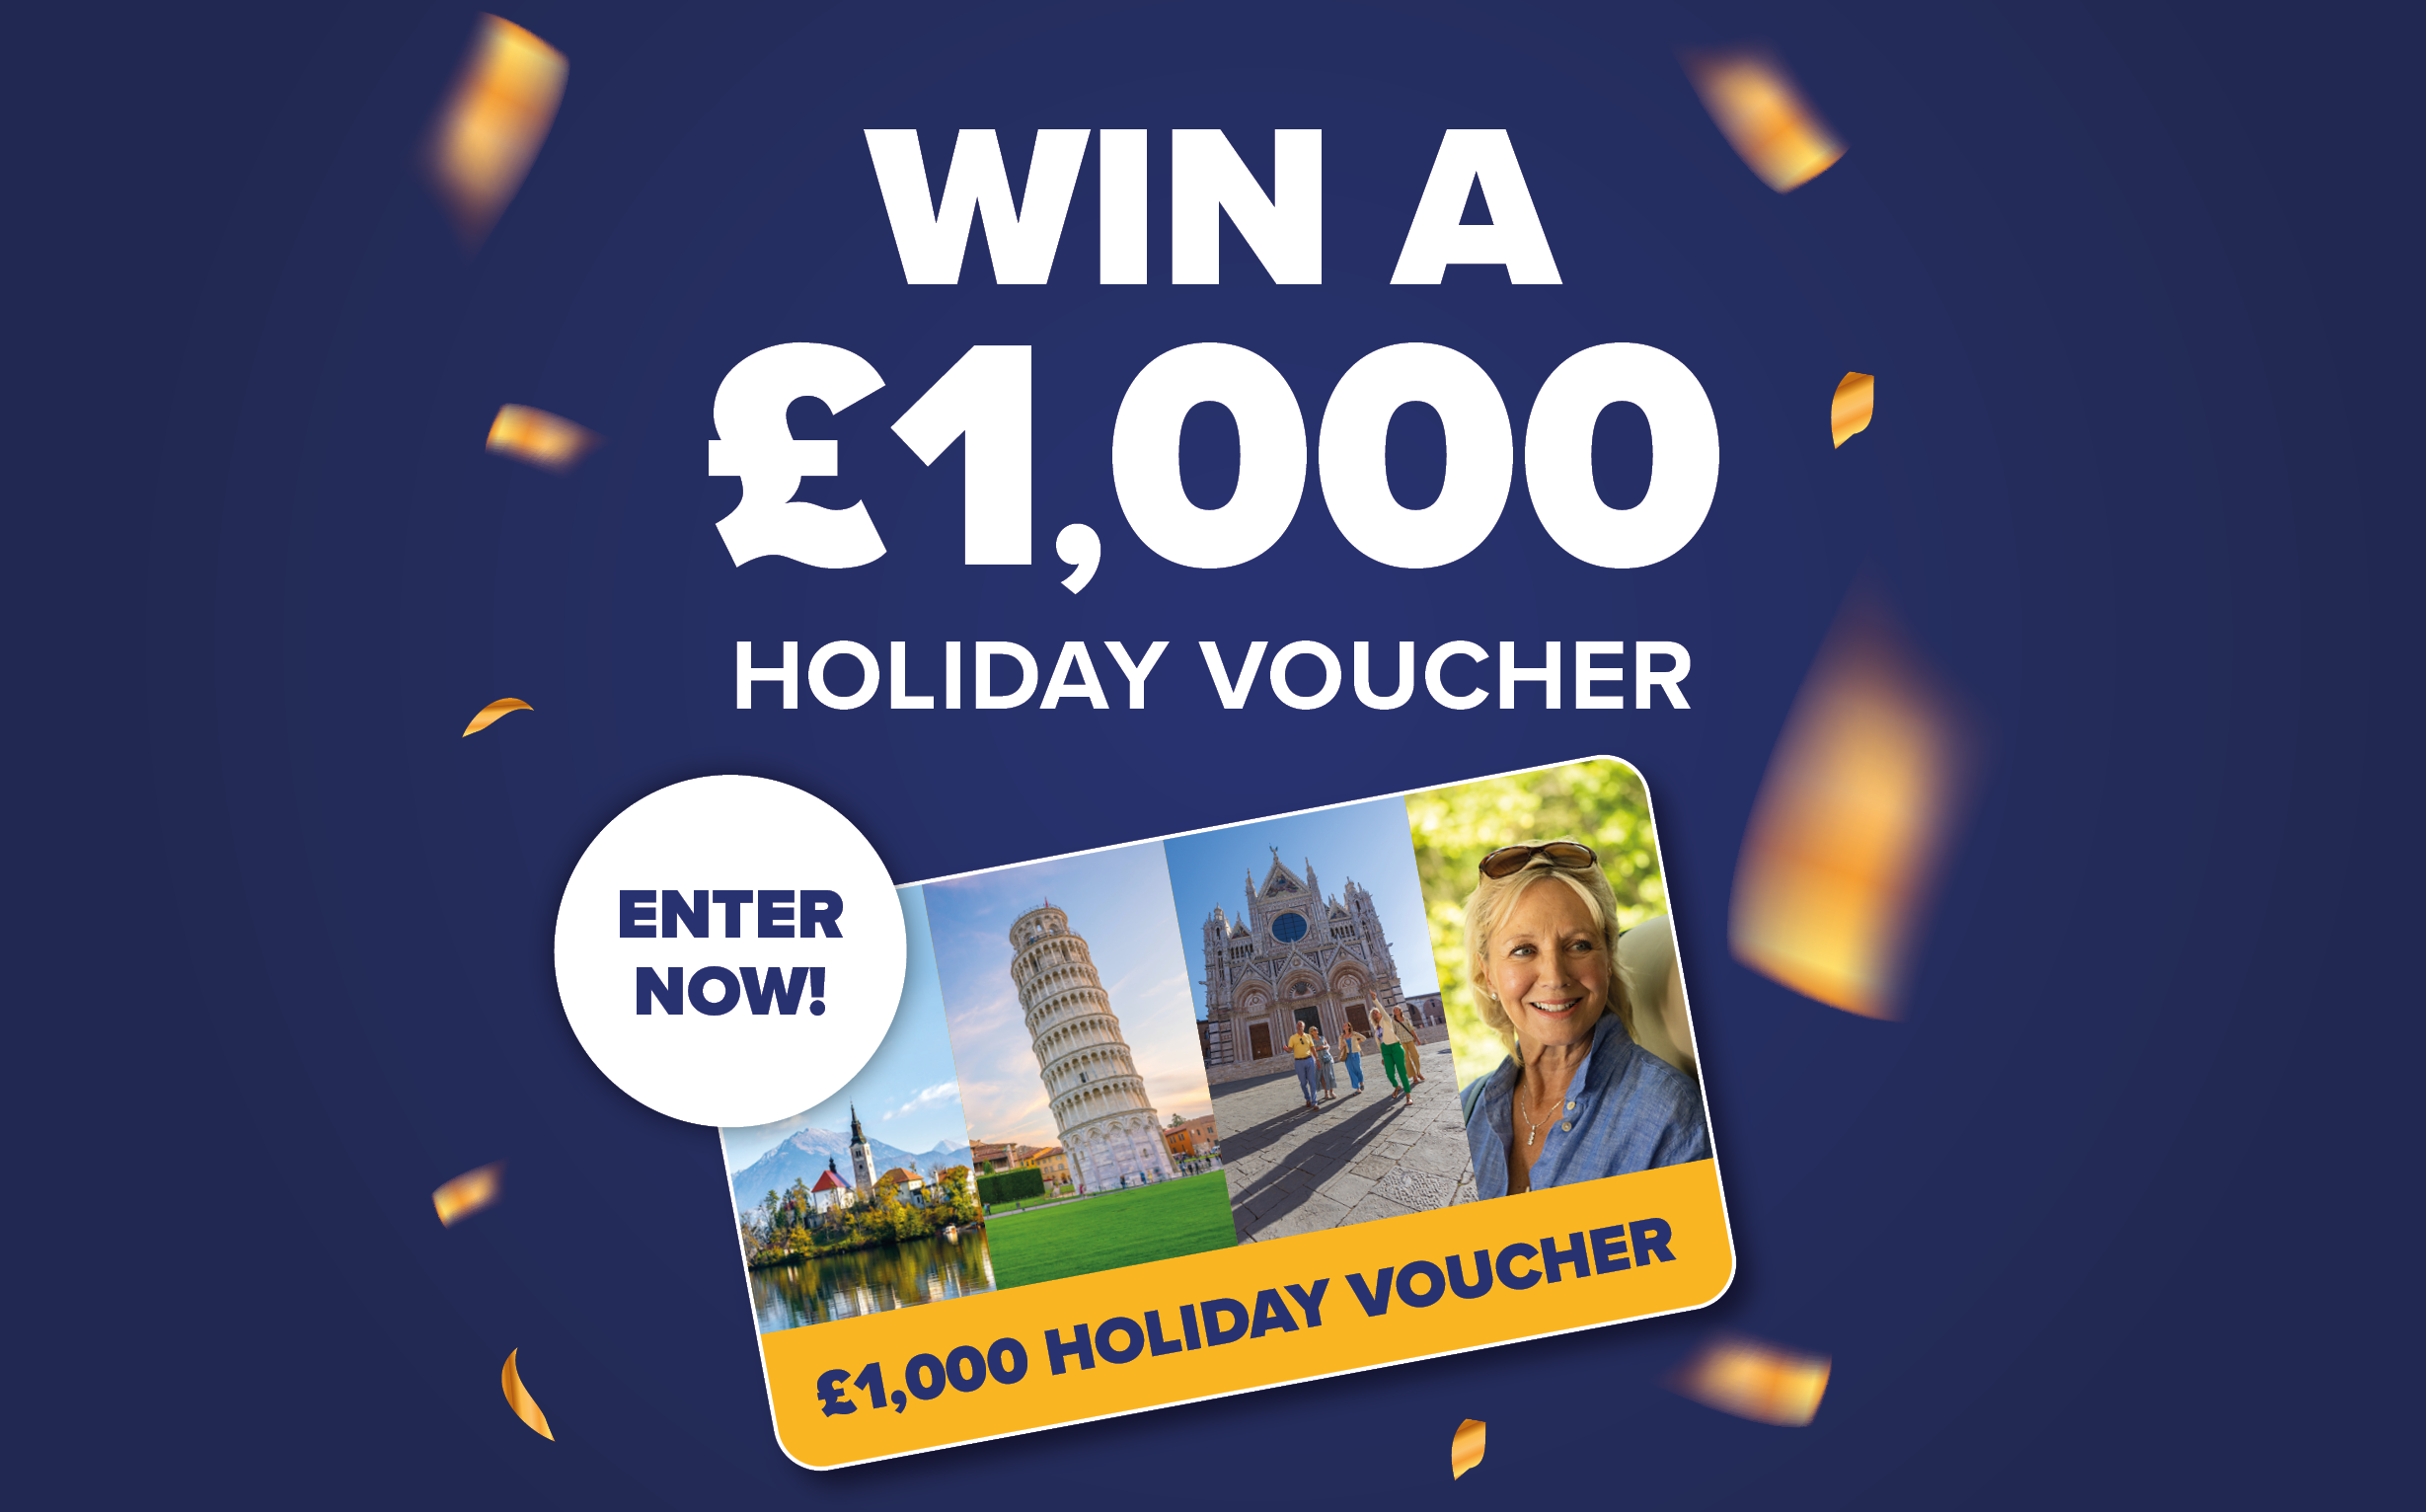 Win a £1,000 Holiday Voucher. Enter Now